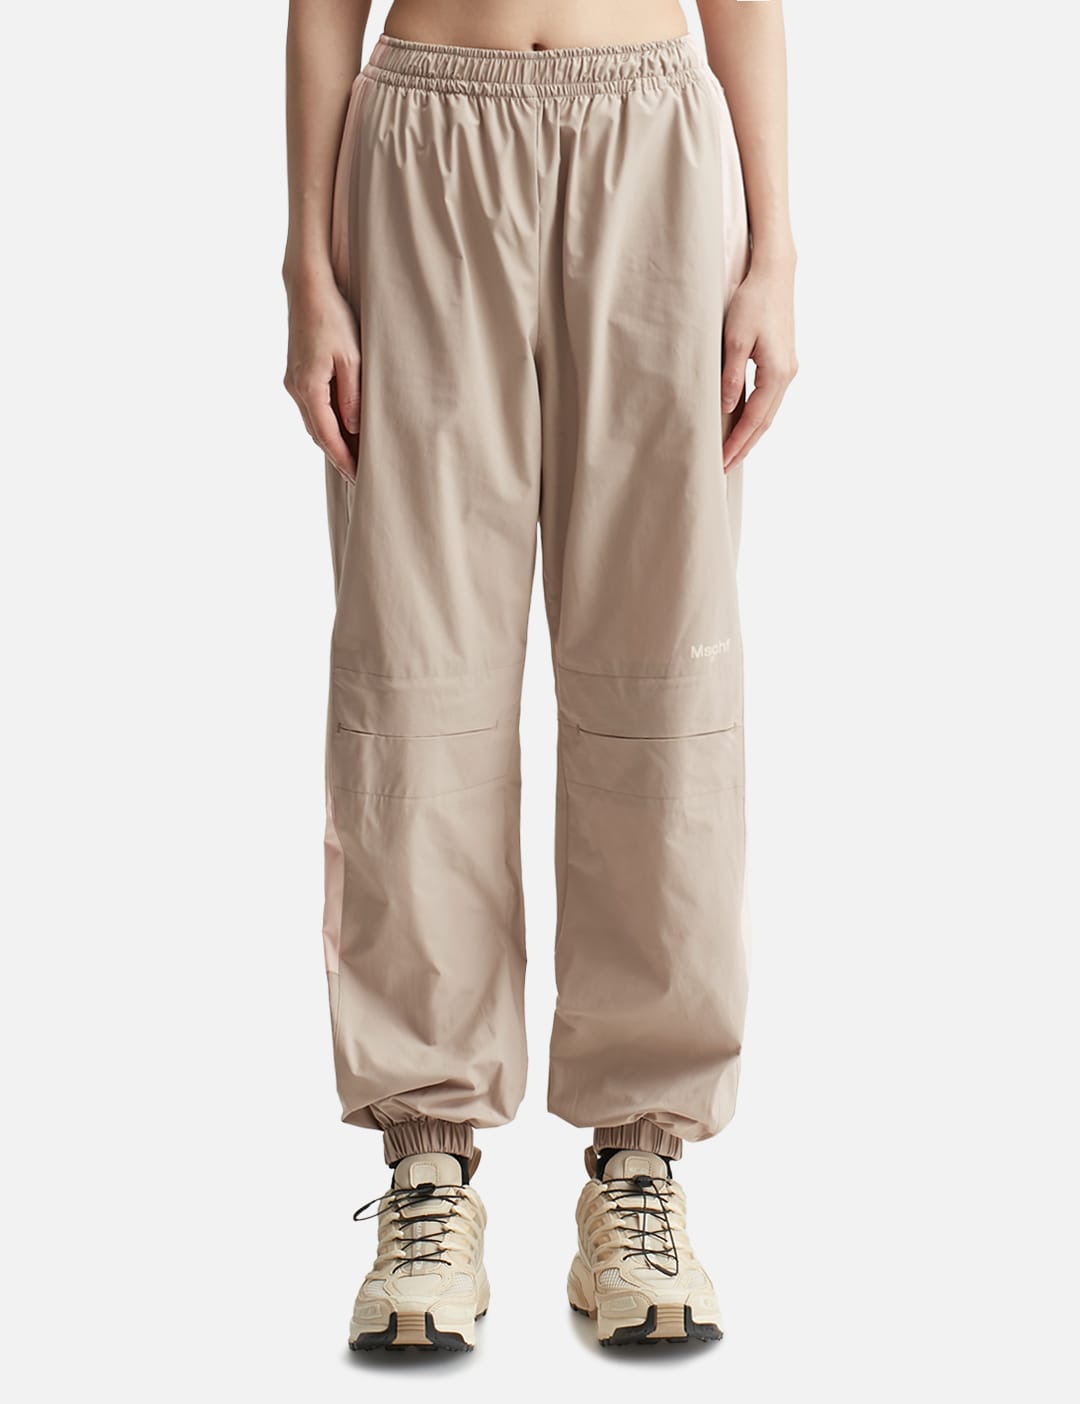 YEEZY Season 4 - Panelled Sweatpants | HBX - Globally Curated 